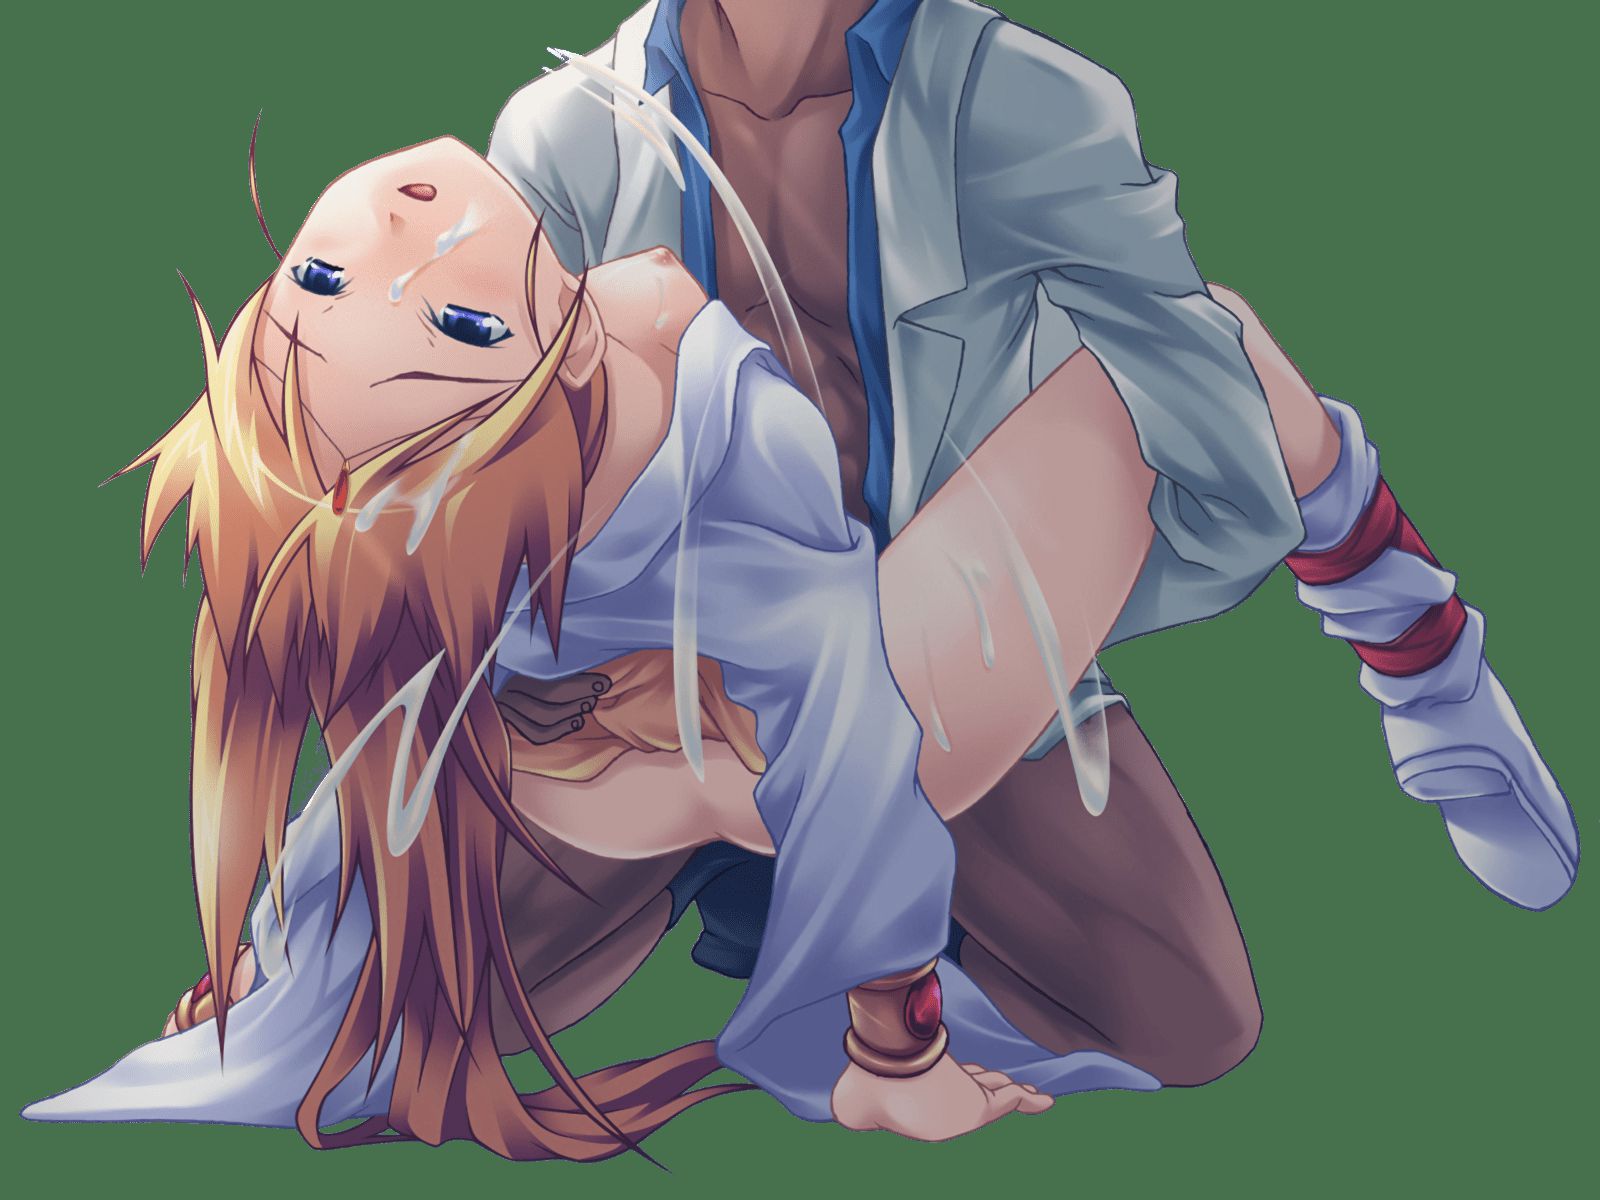 【Erocora Character Material】PNG background transparent erotic image such as anime characters Part 421 12